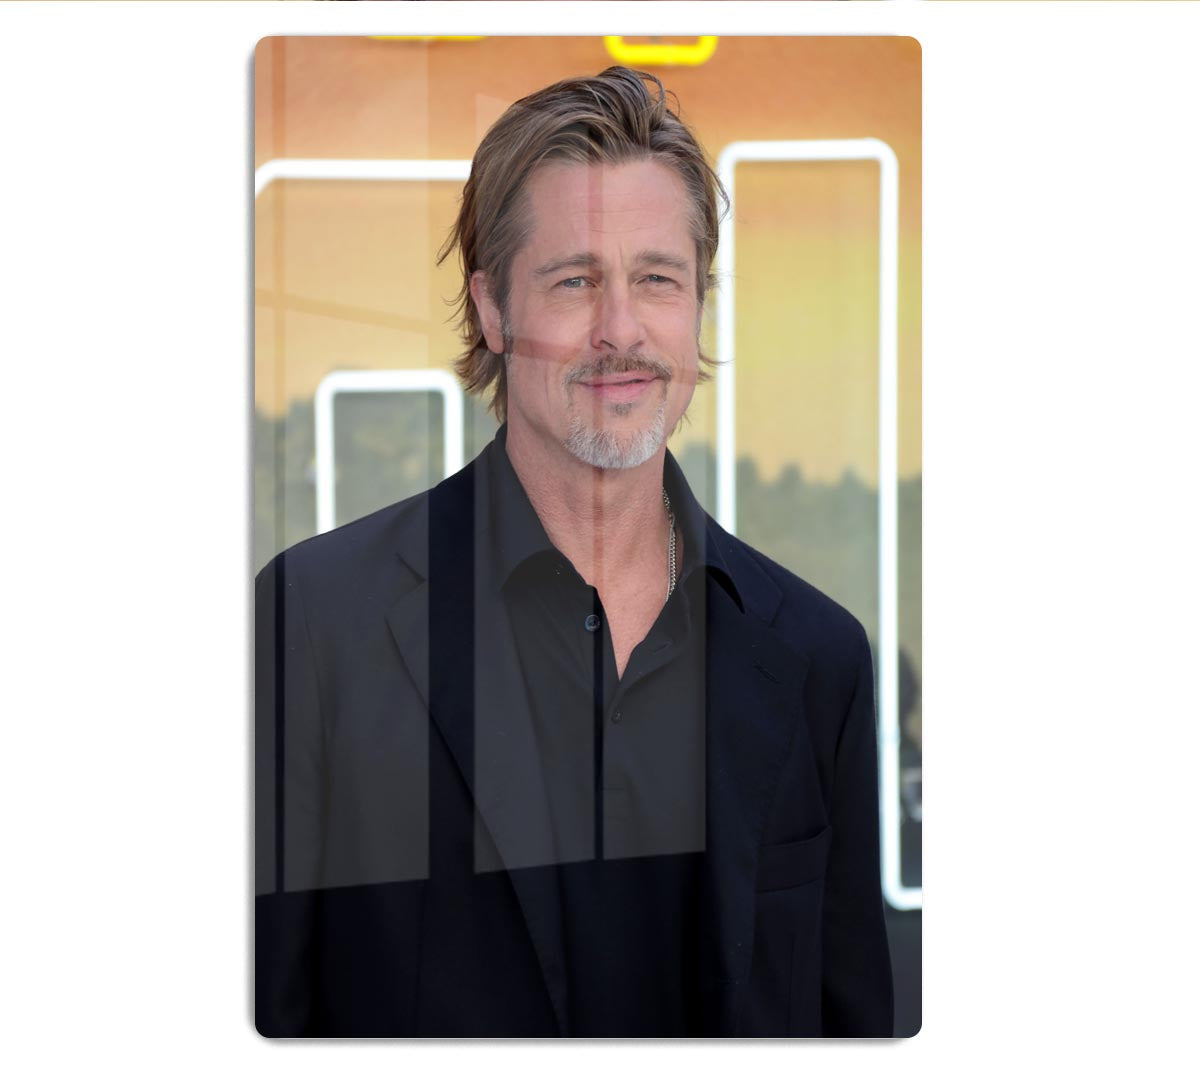 Brad Pitt Once Upon A Time In Hollywood Premiere London HD Metal Print - Canvas Art Rocks - 1